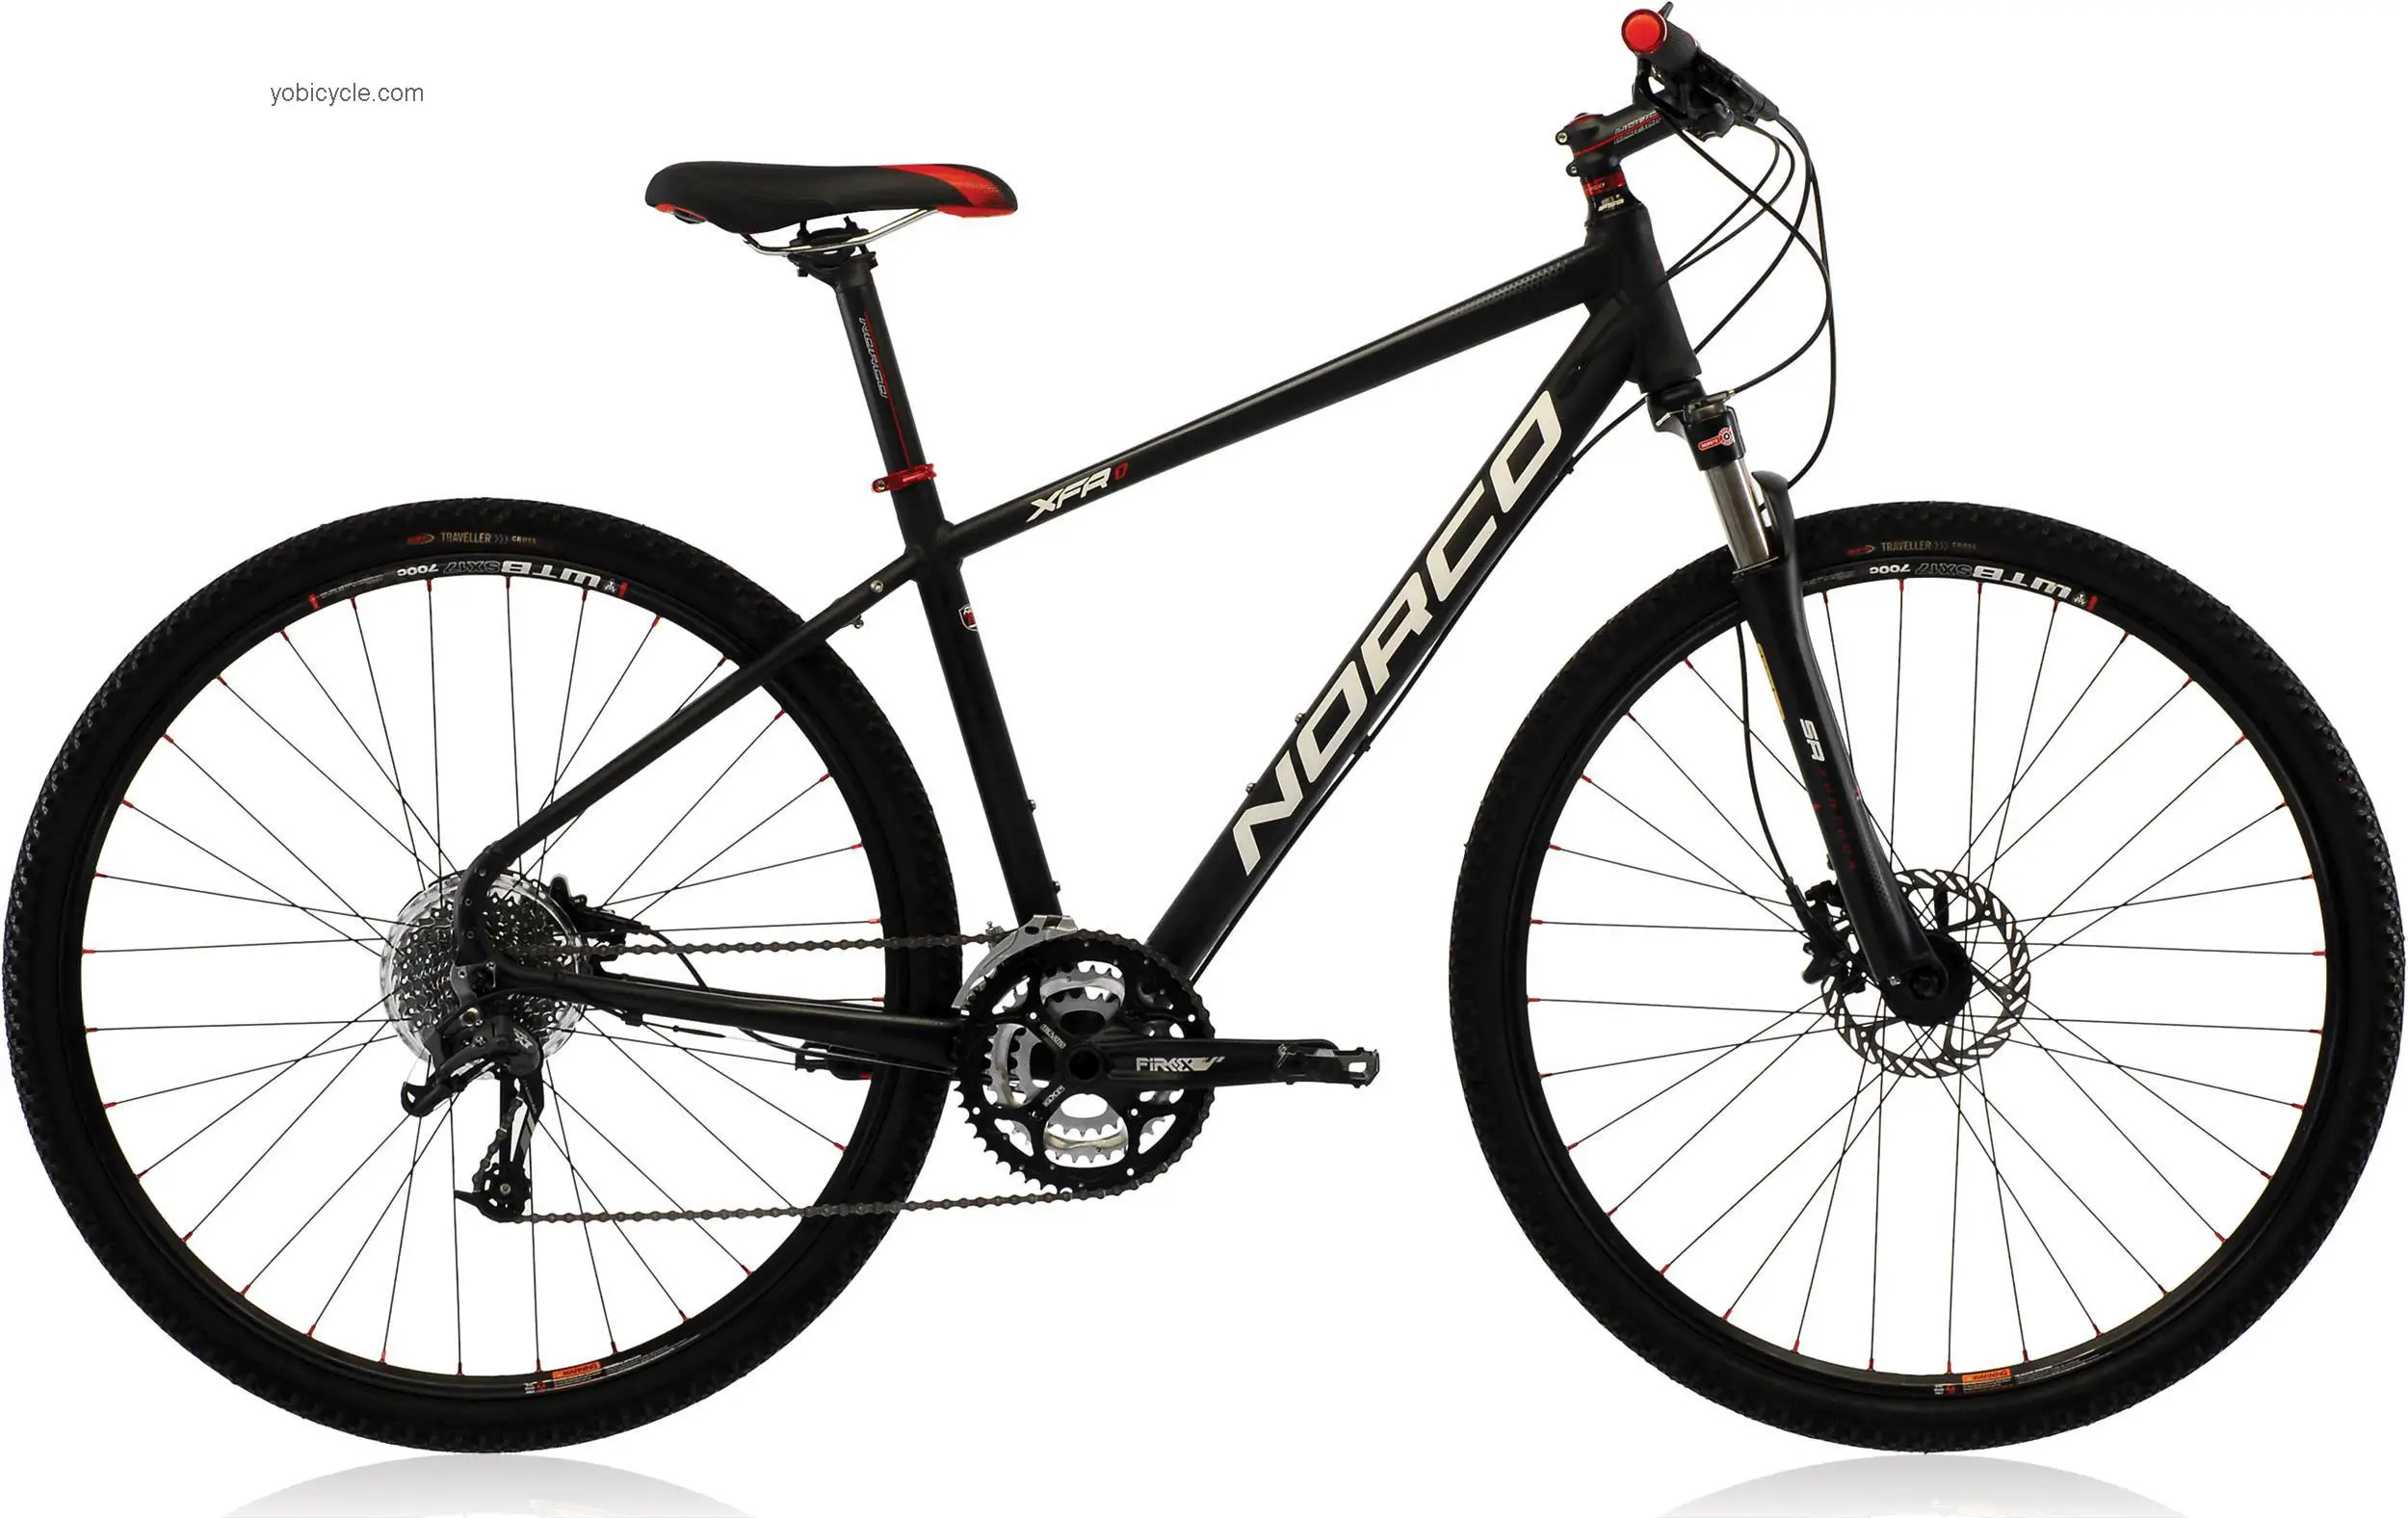 Norco XFR 1 2013 comparison online with competitors